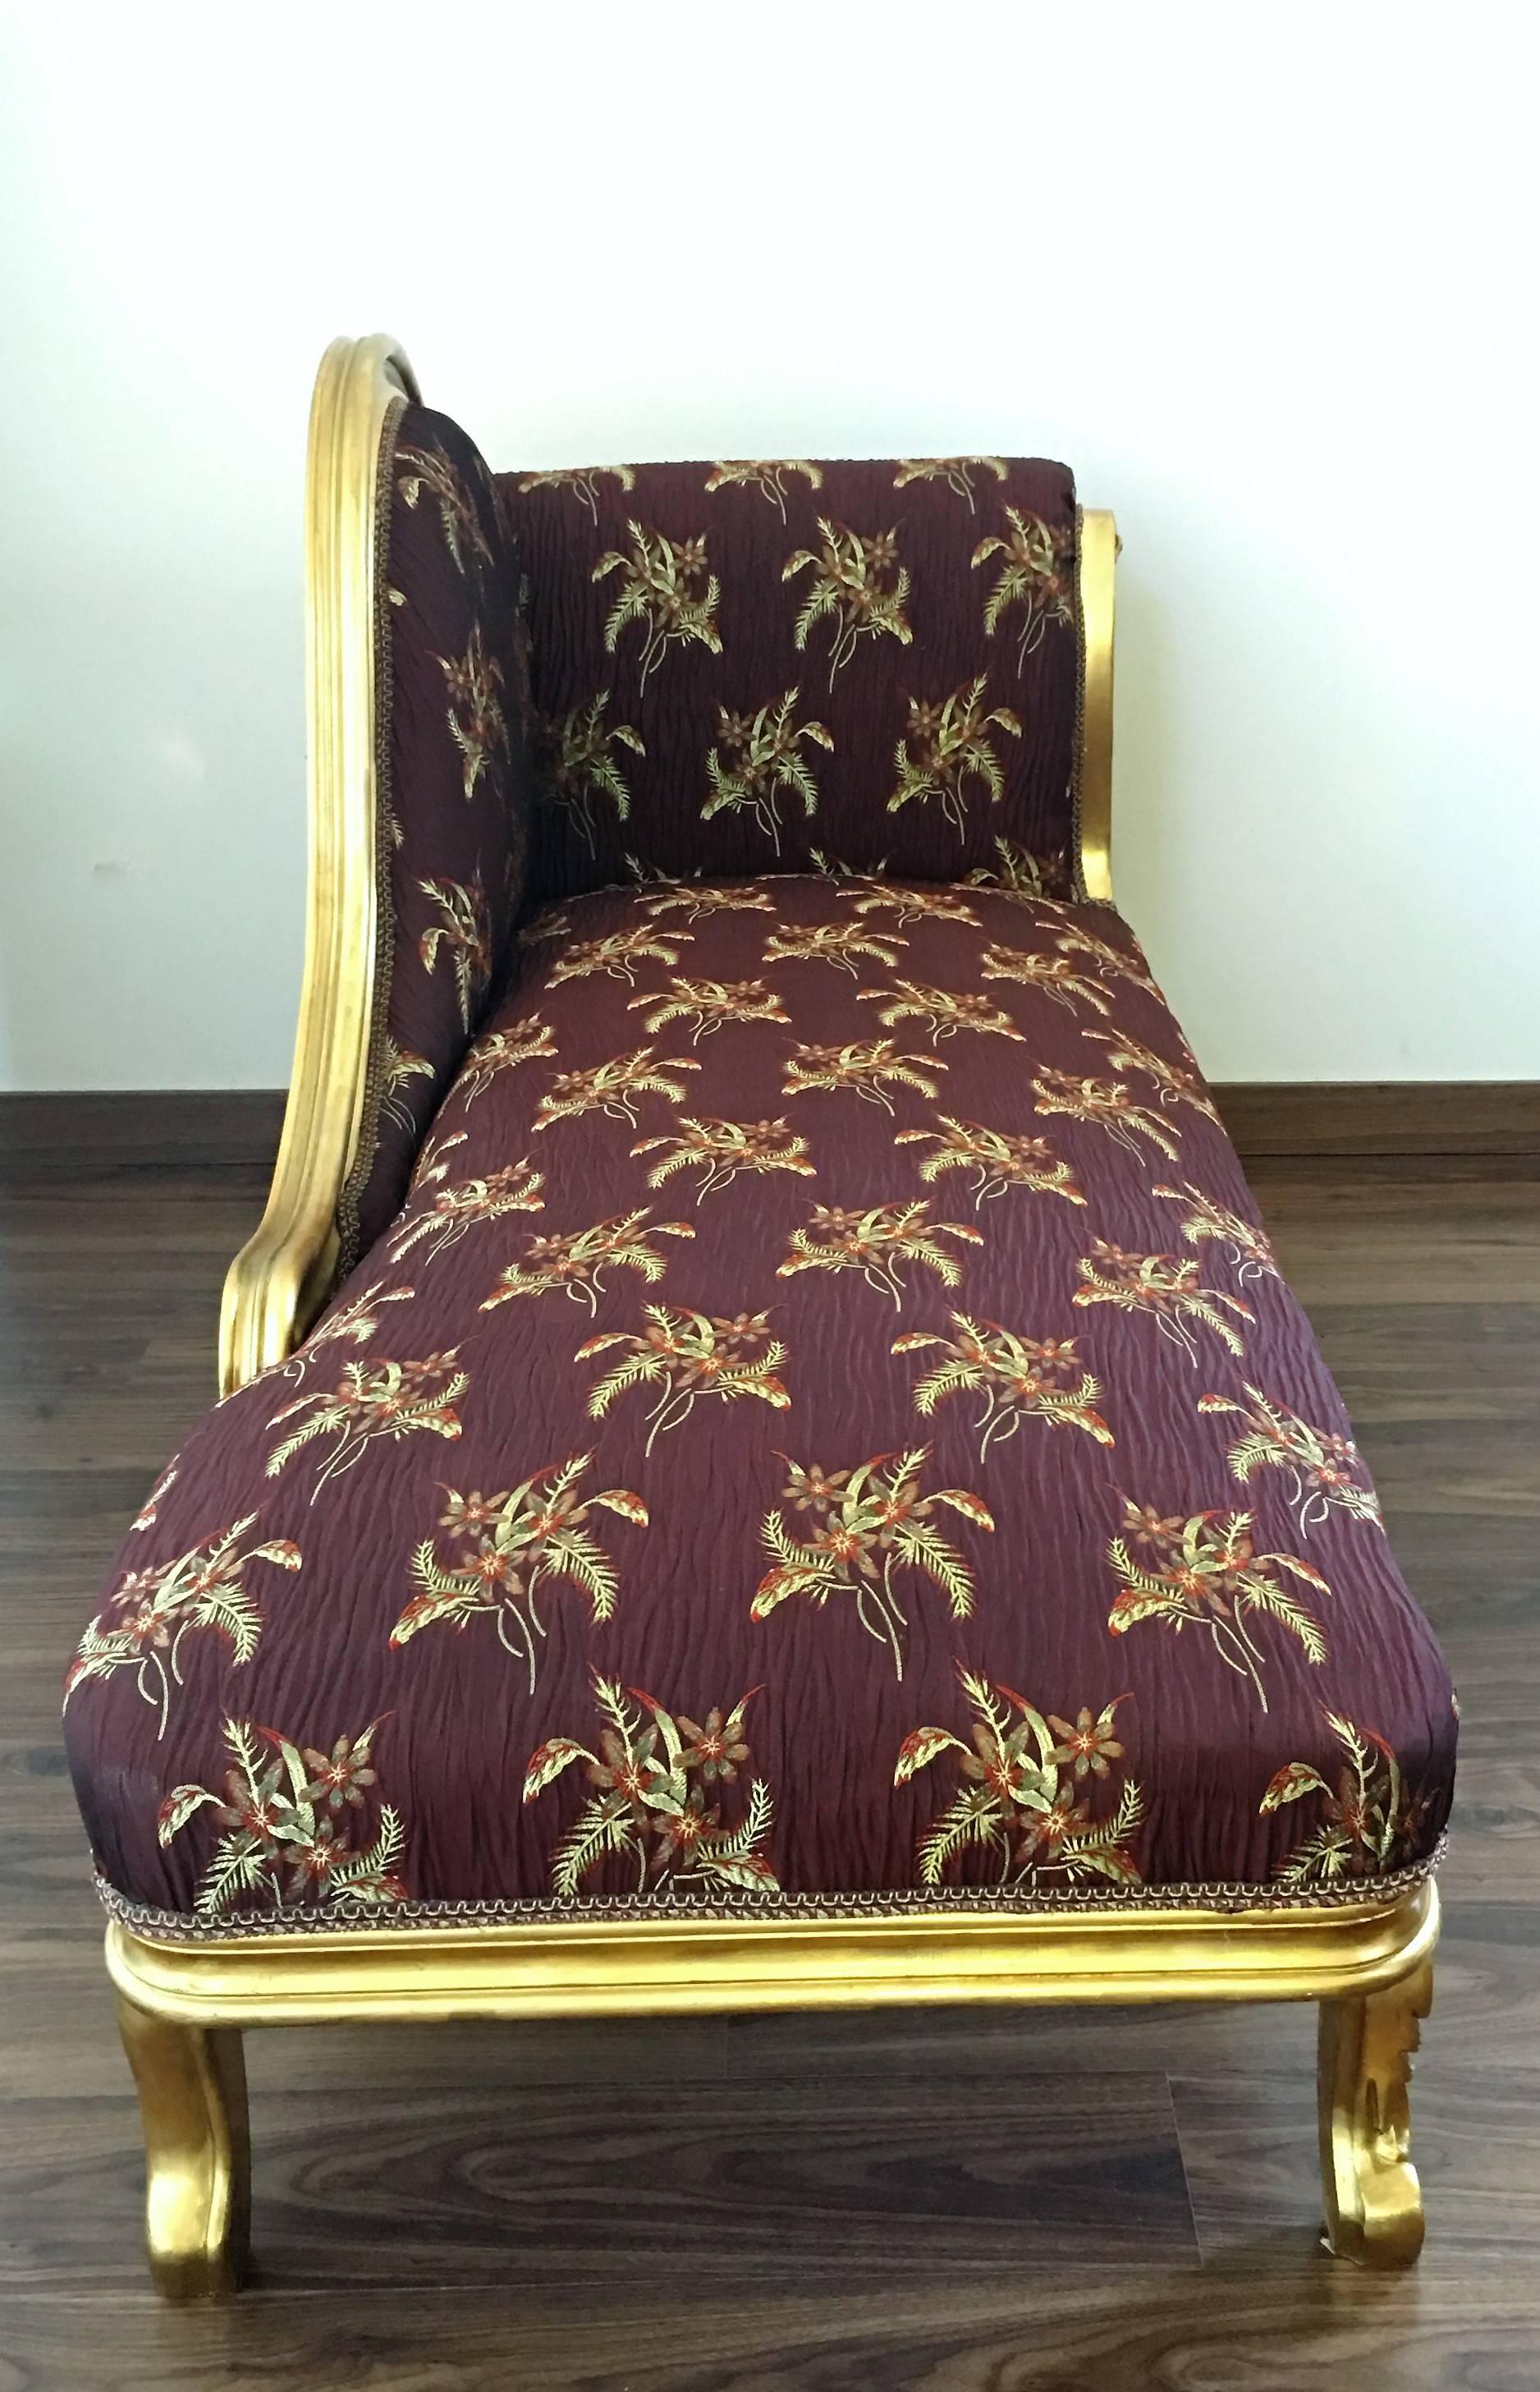 Louis XV style gold lacquered chaise longue or daybed.